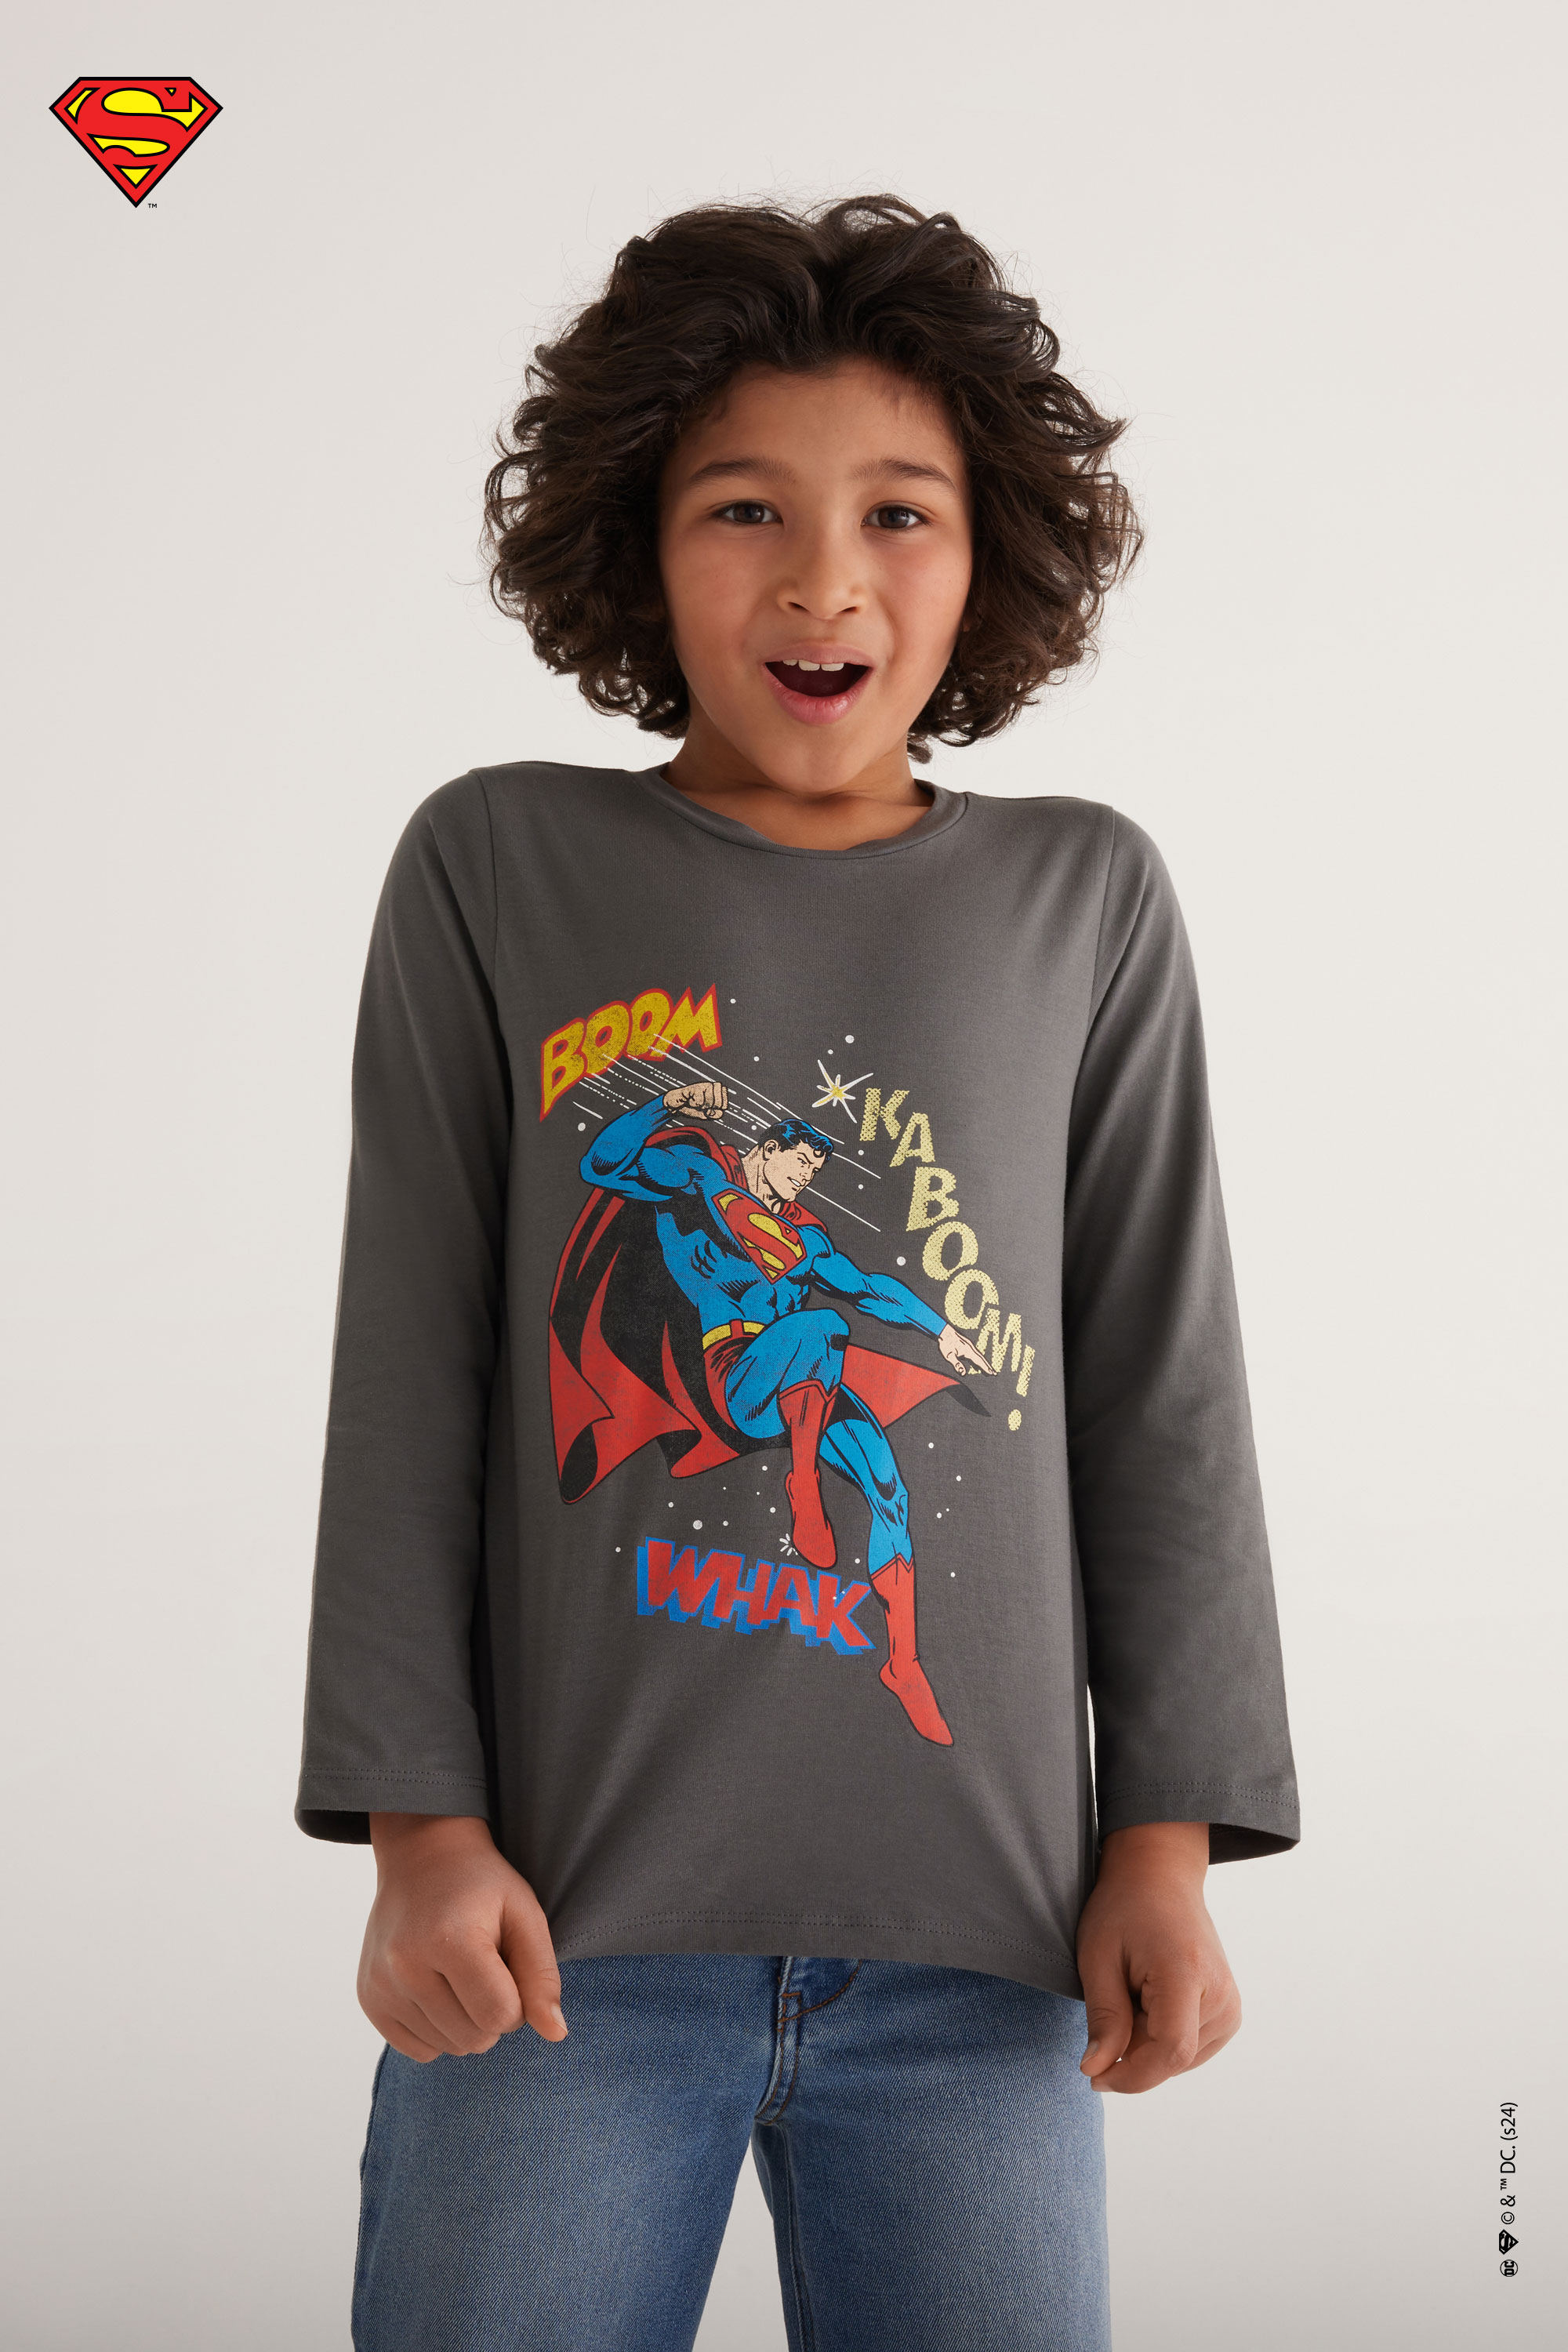 Boys’ Long-Sleeved Rounded-Neck Jersey with Superman Print